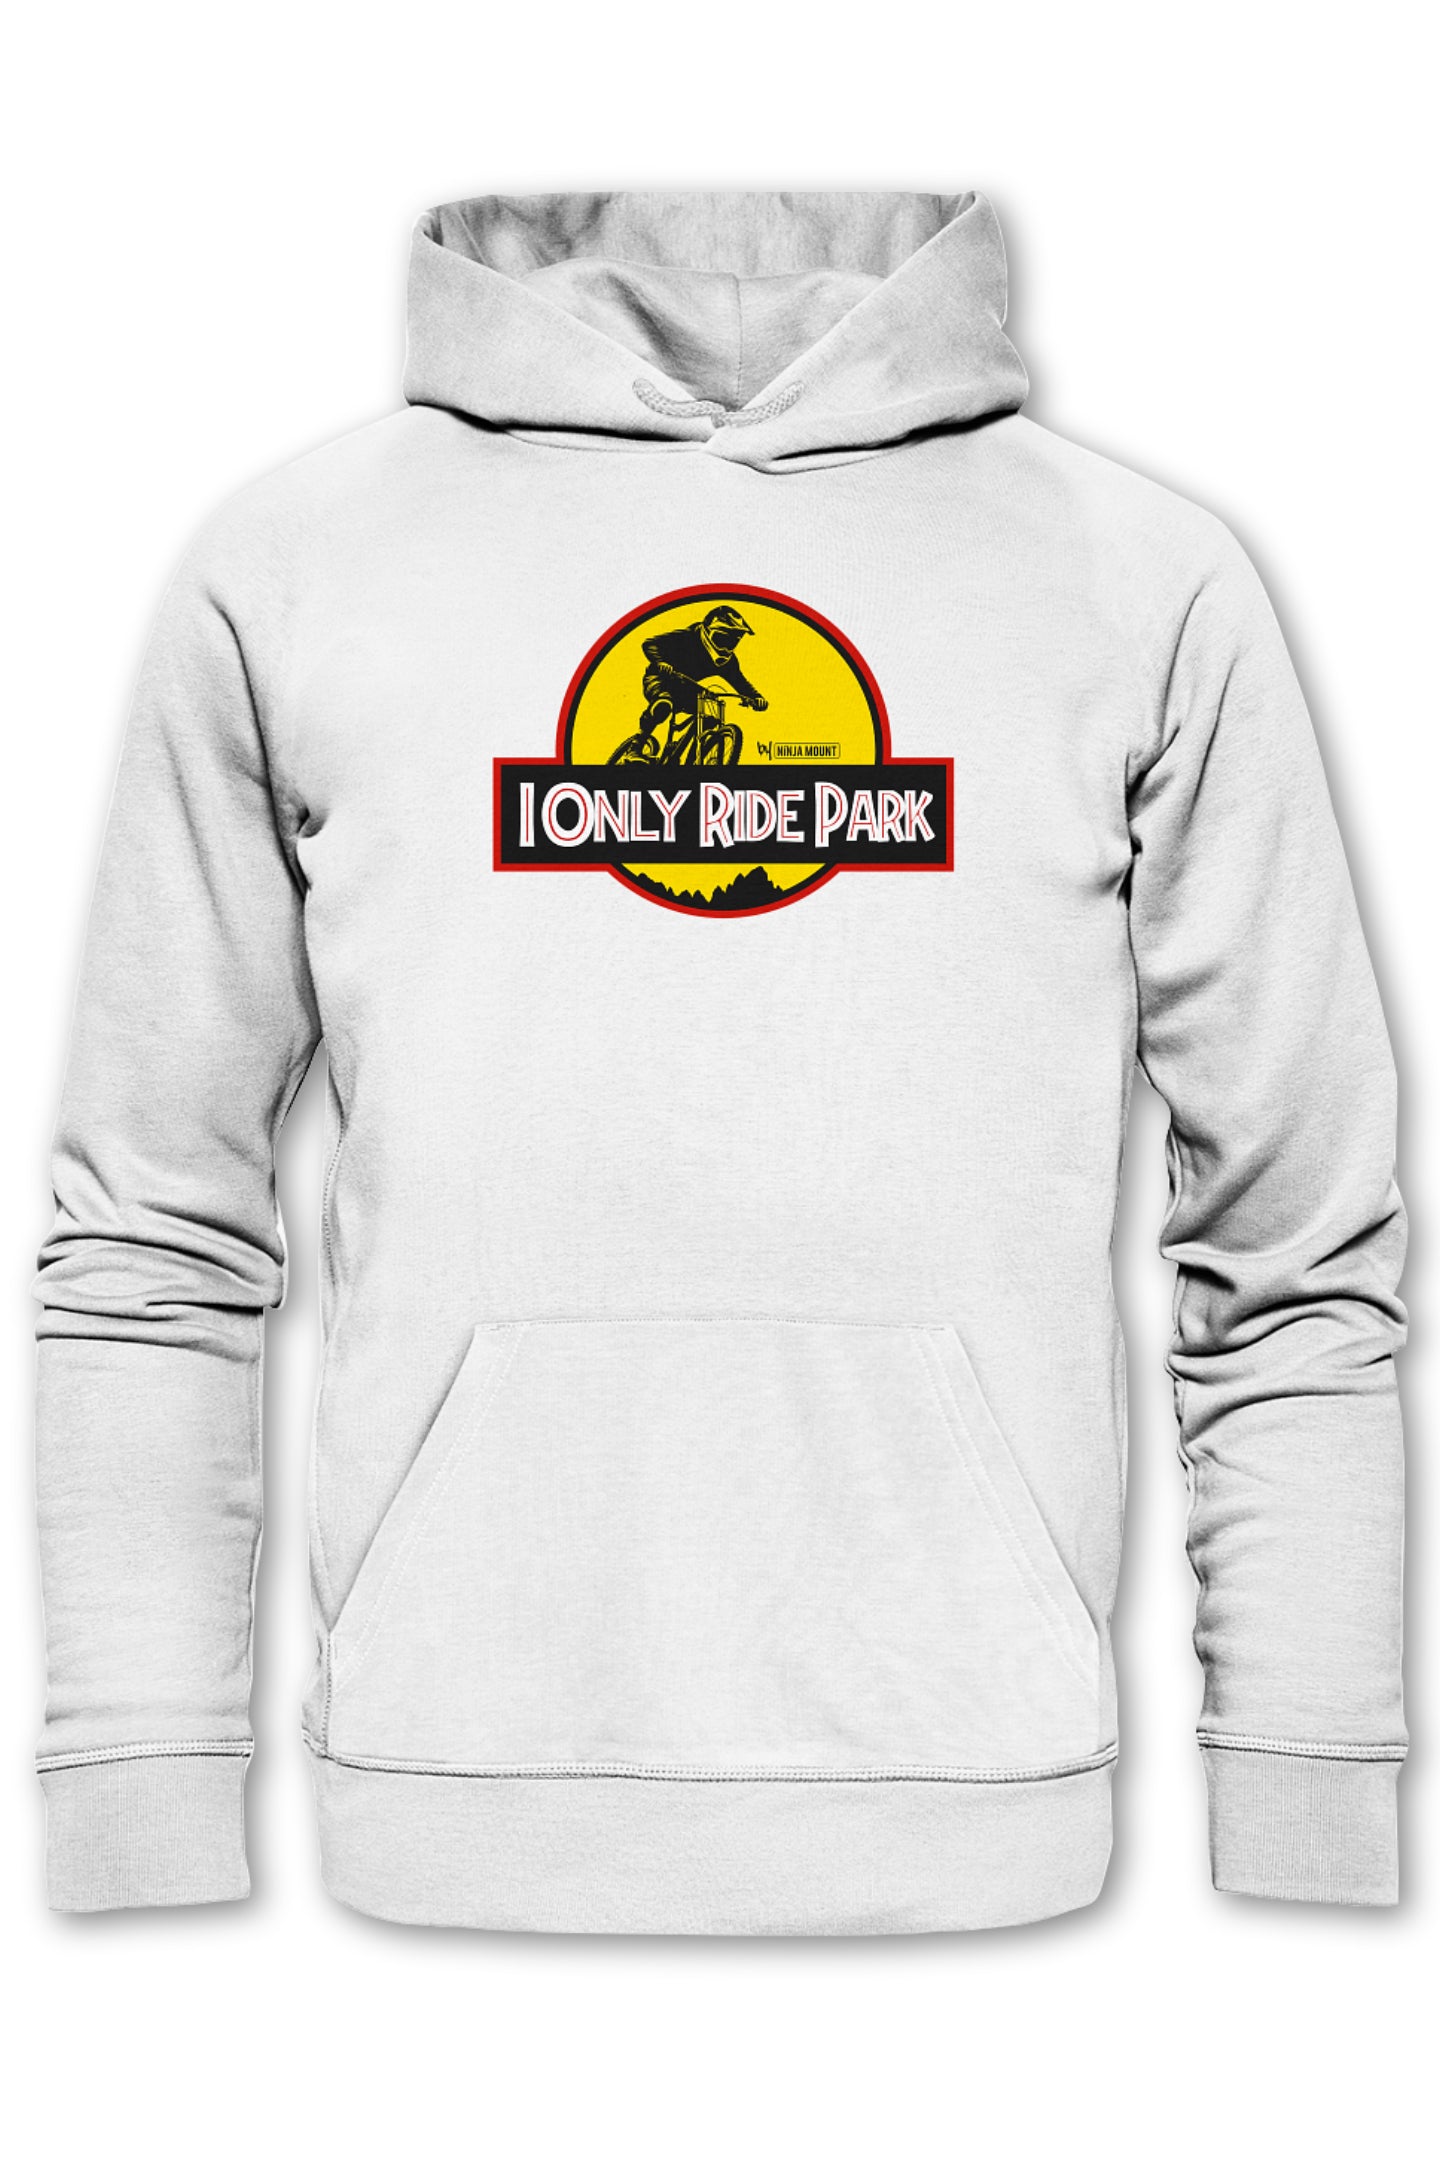 I ONLY RIDE PARK - Organic Hoodie - WHITE